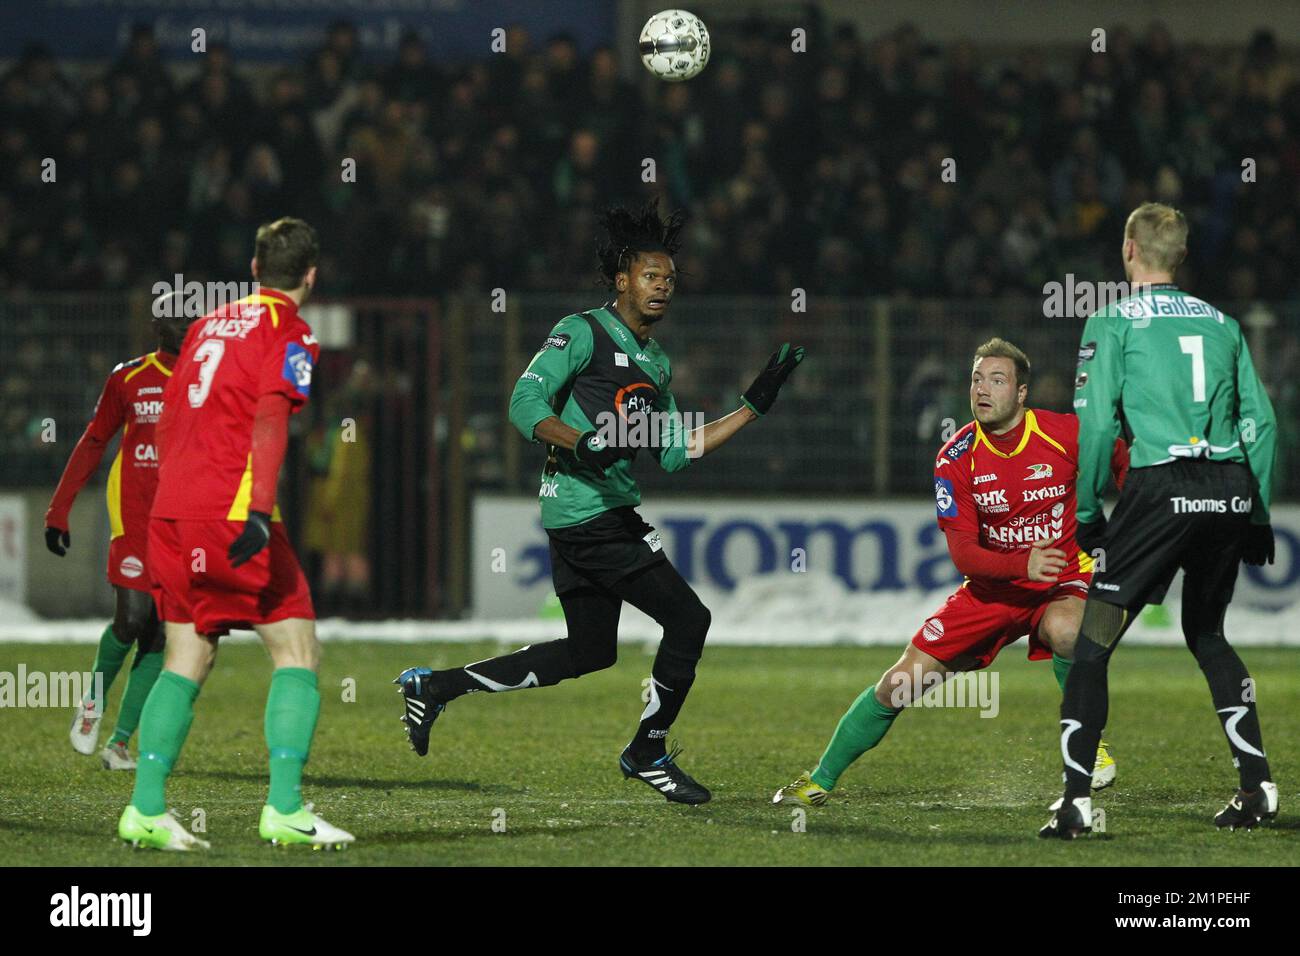 20130116 - OOSTENDE, BELGIUM: Cercle's Michael Uchebo pictured during the return leg of the Cofidis Cup 1/4 final between Oostende KV and Cercle Brugge, Wednesday 16 January 2013 in Oostende. BELGA PHOTO KRISTOF VAN ACCOM Stock Photo